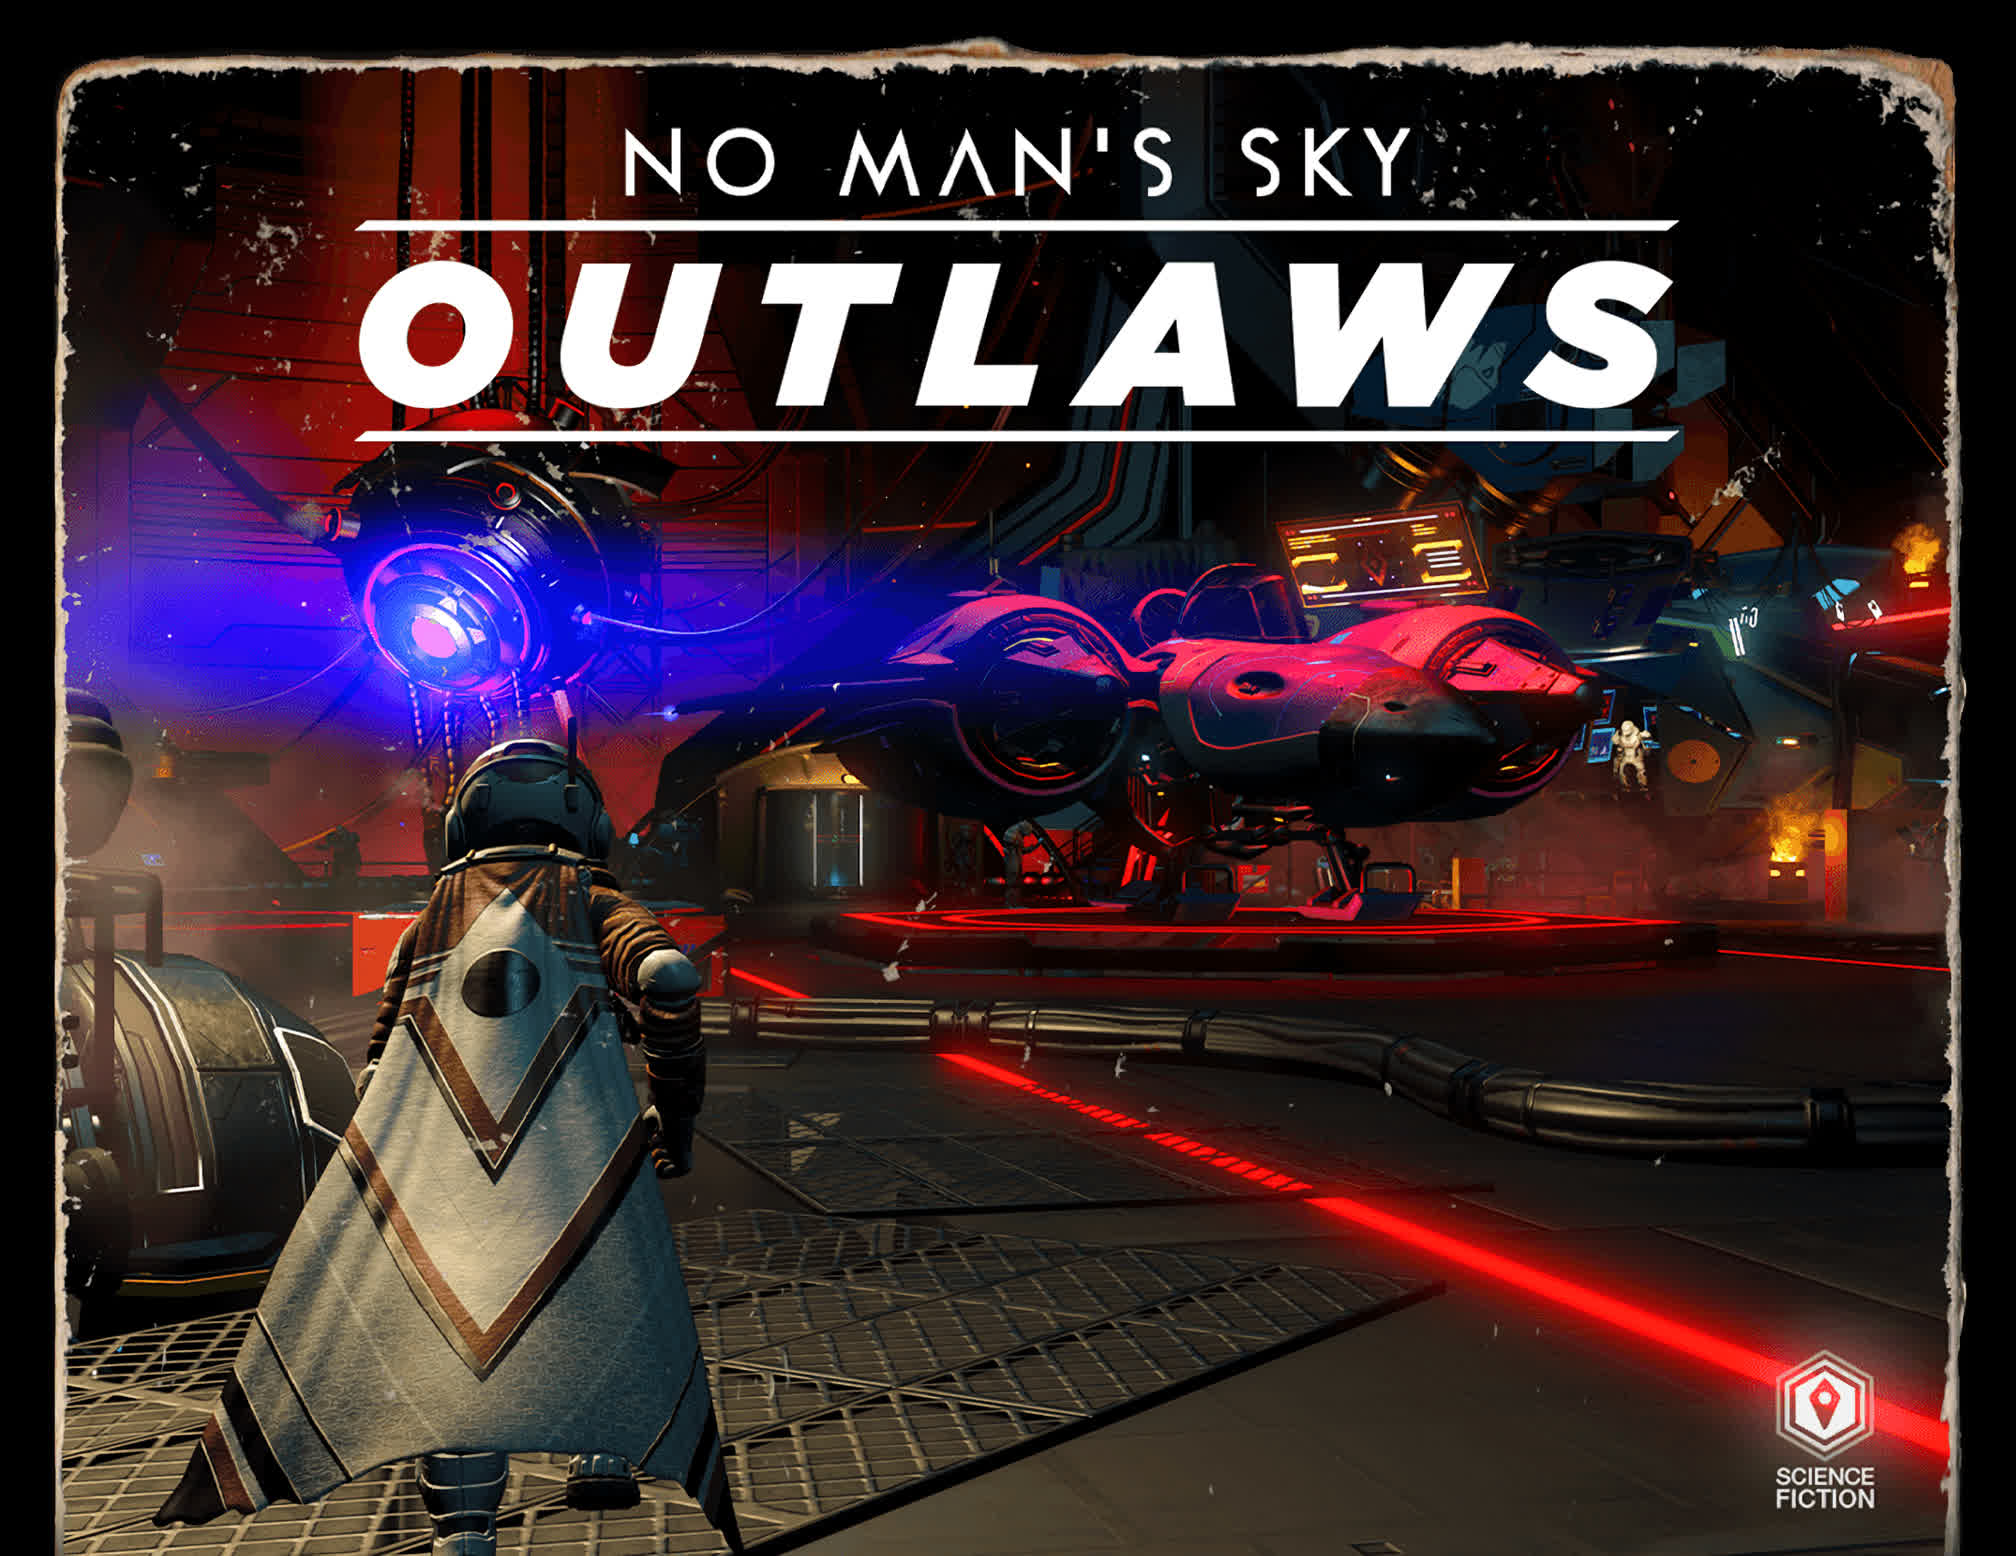 No Man's Sky Outlaws update makes piracy a whole lot more fun